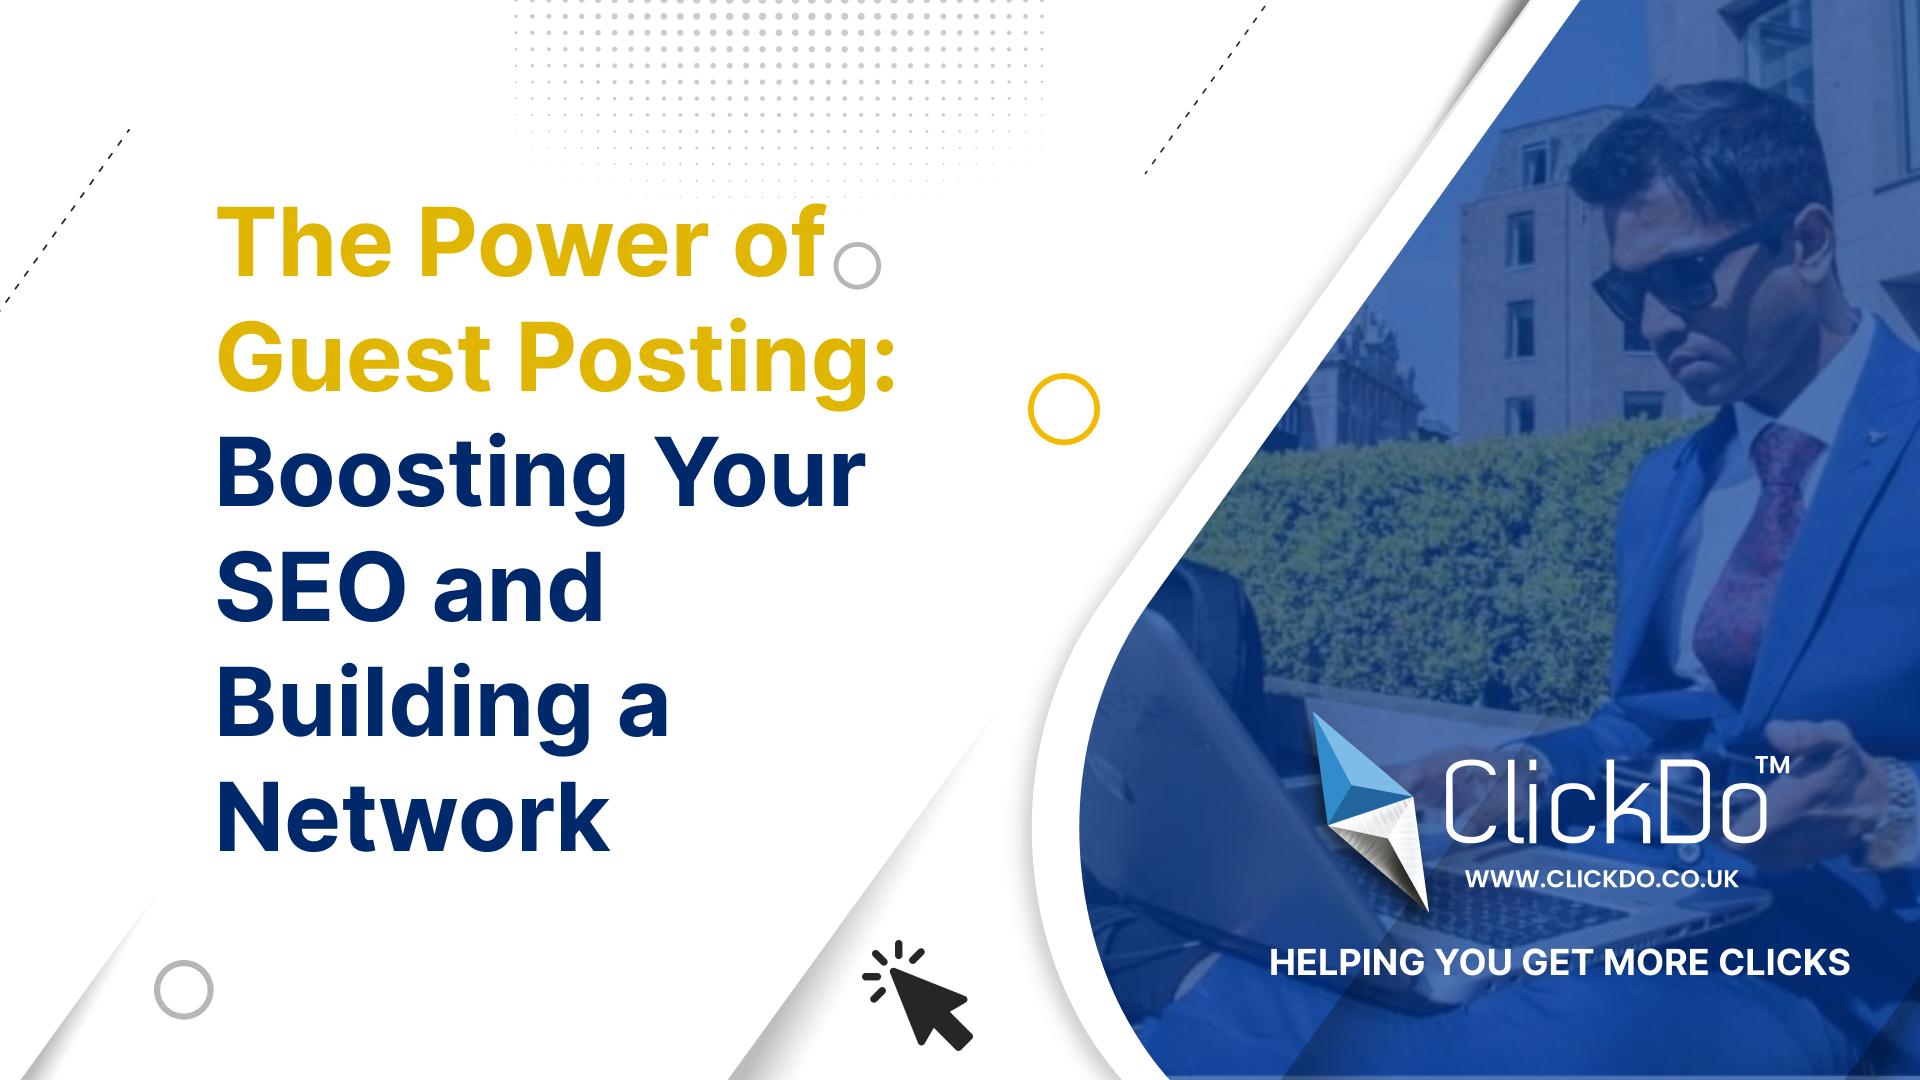 The-Power-of-Guest-Posting-Boosting-Your-SEO-and-Building-a-Network